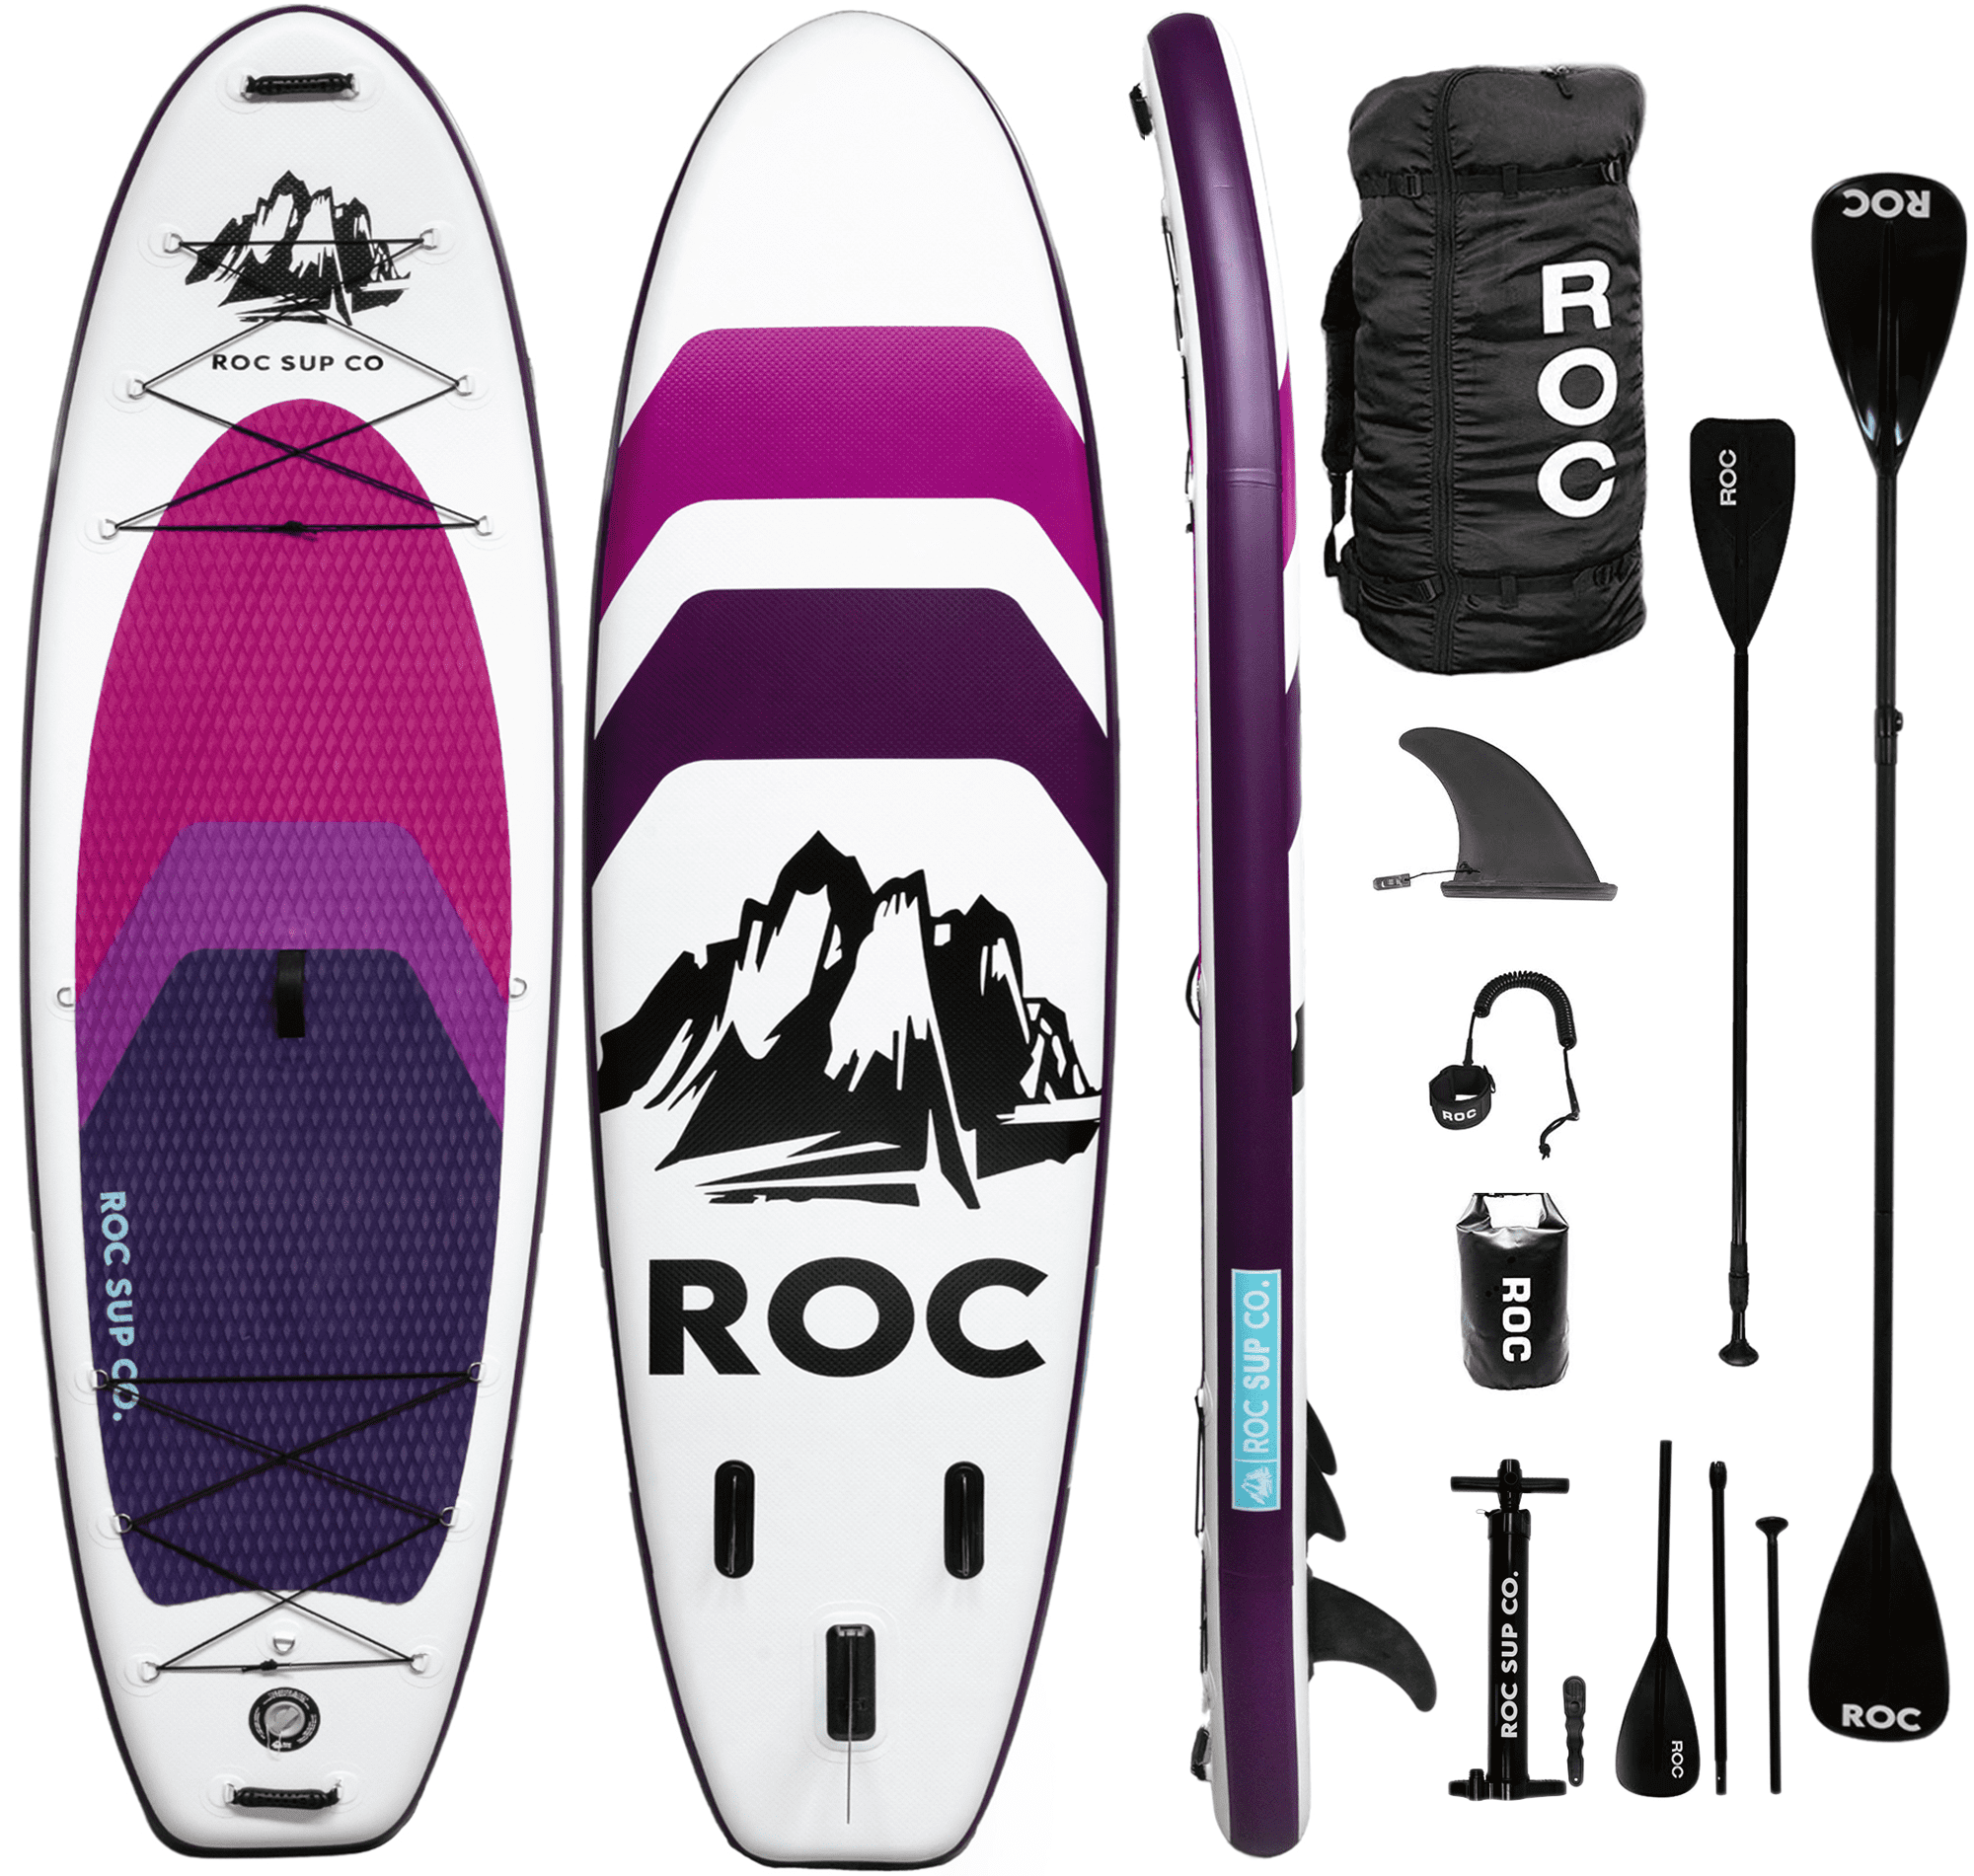 Roc Up Paddle Board with sup Accessories & Backpack, Non-Slip Deck, Waterproof Bag, Leash, Paddle and Hand Pump - Walmart.com